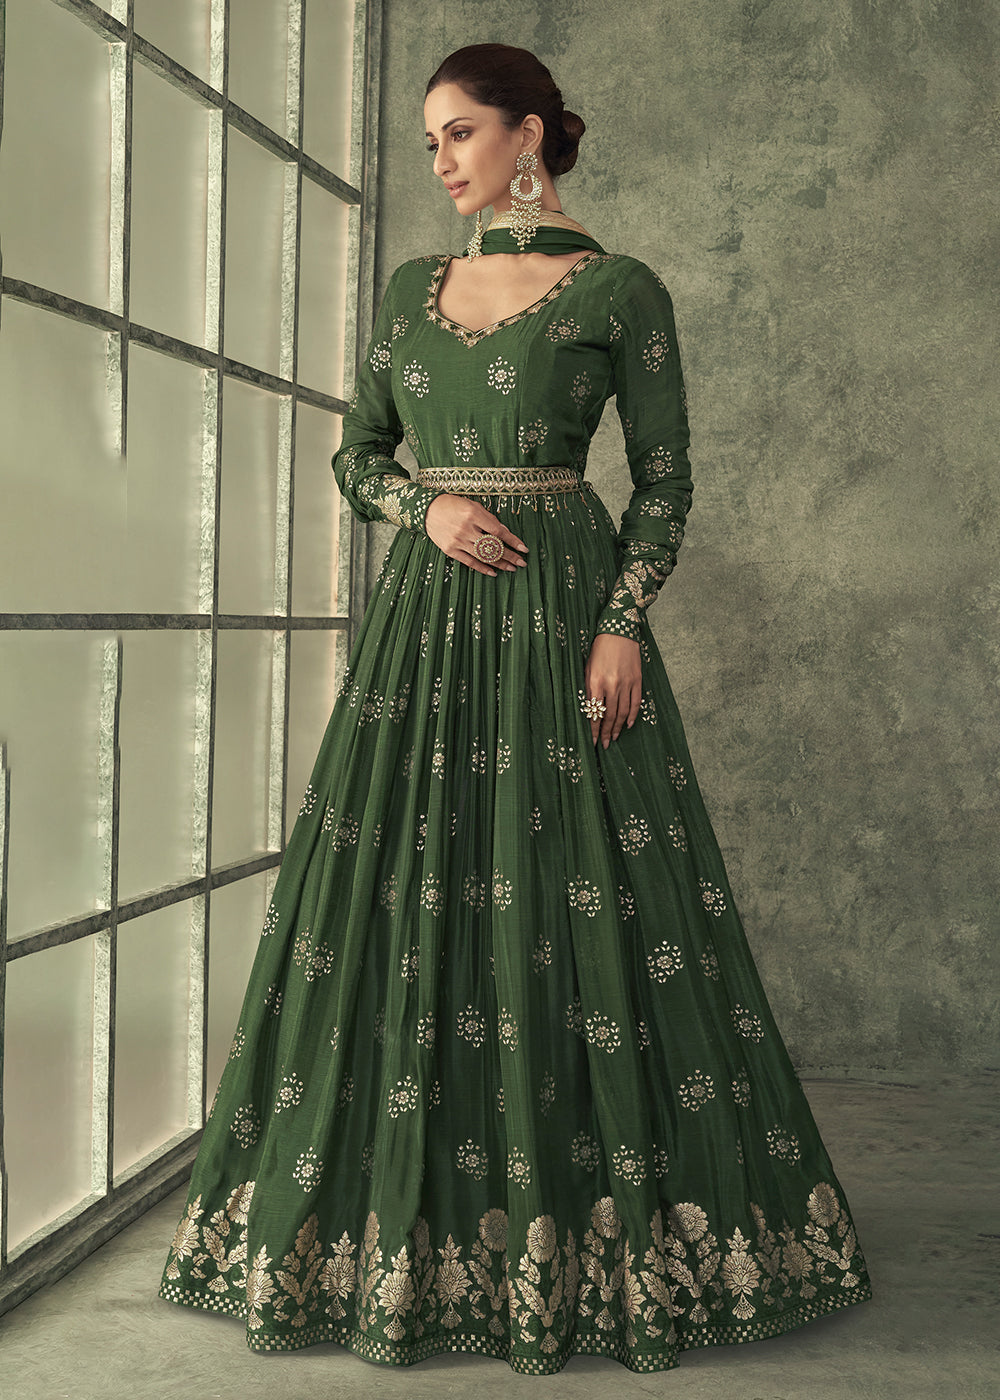 Buy Now Pretty Green Viscose Silk Embroidered Wedding Anarkali Gown Online in USA, UK, Australia, New Zealand, Canada & Worldwide at Empress Clothing.